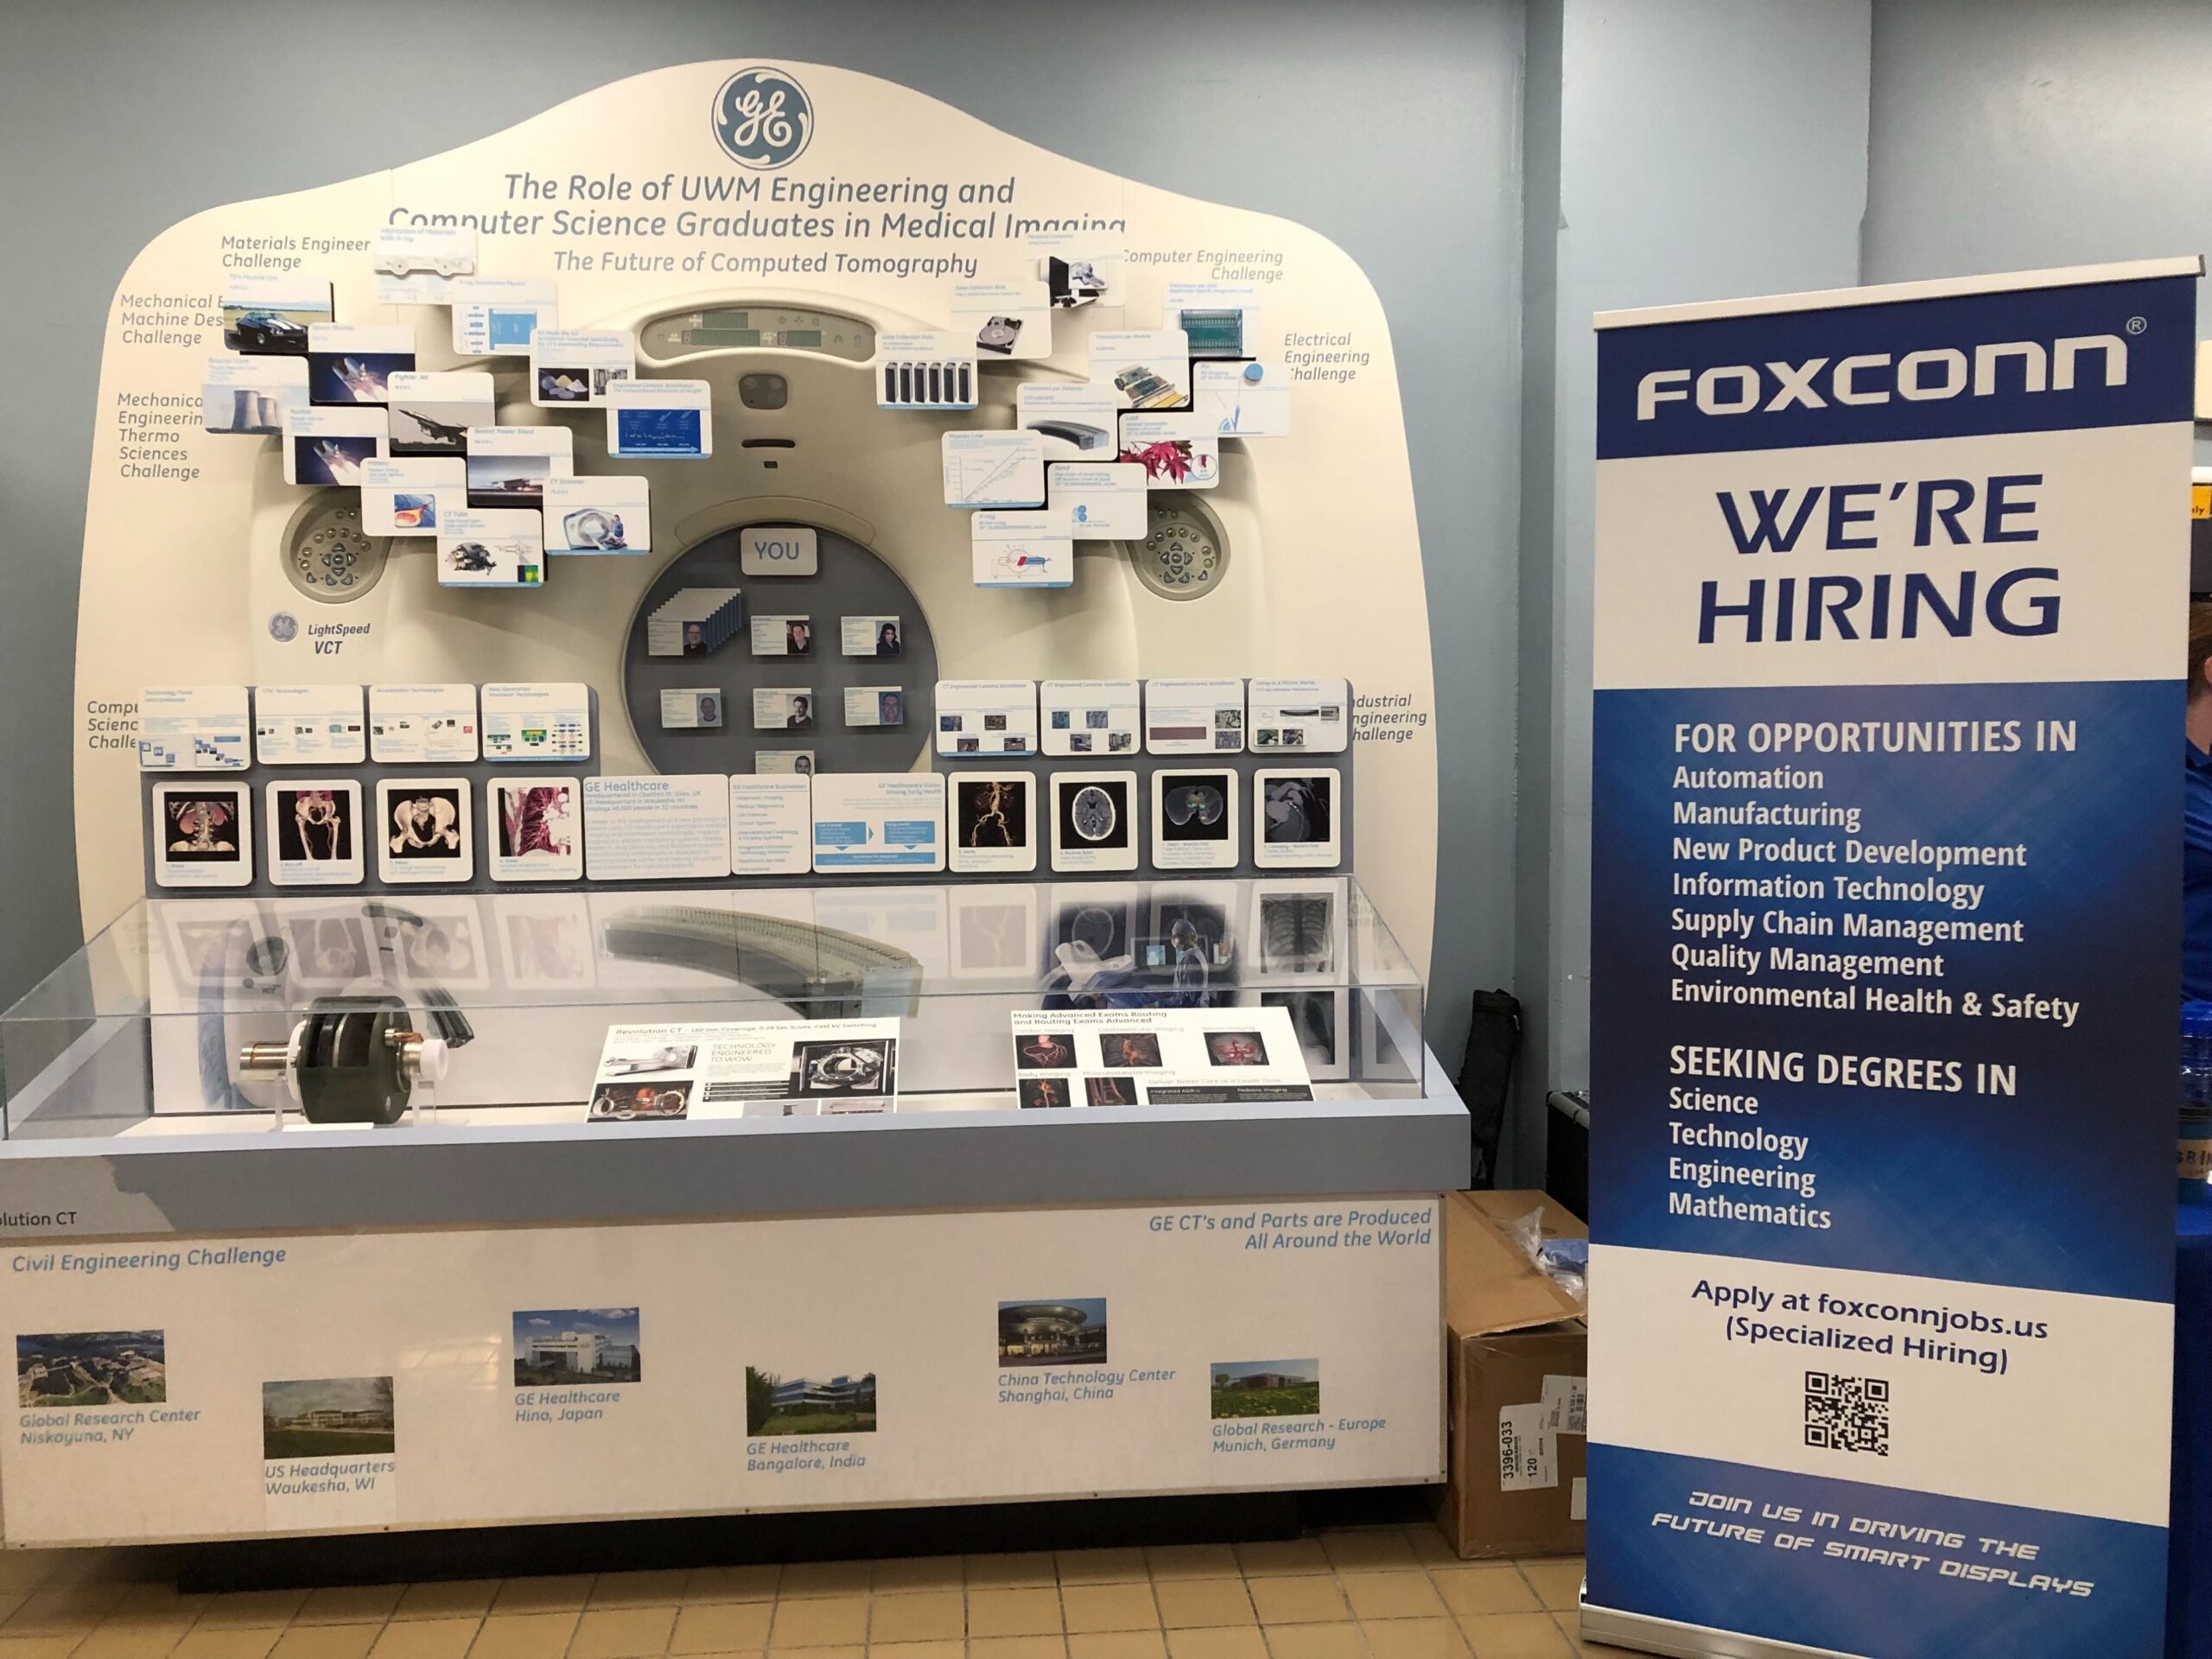 "Foxconn Day" at the University of Wisconsin-Milwaukee